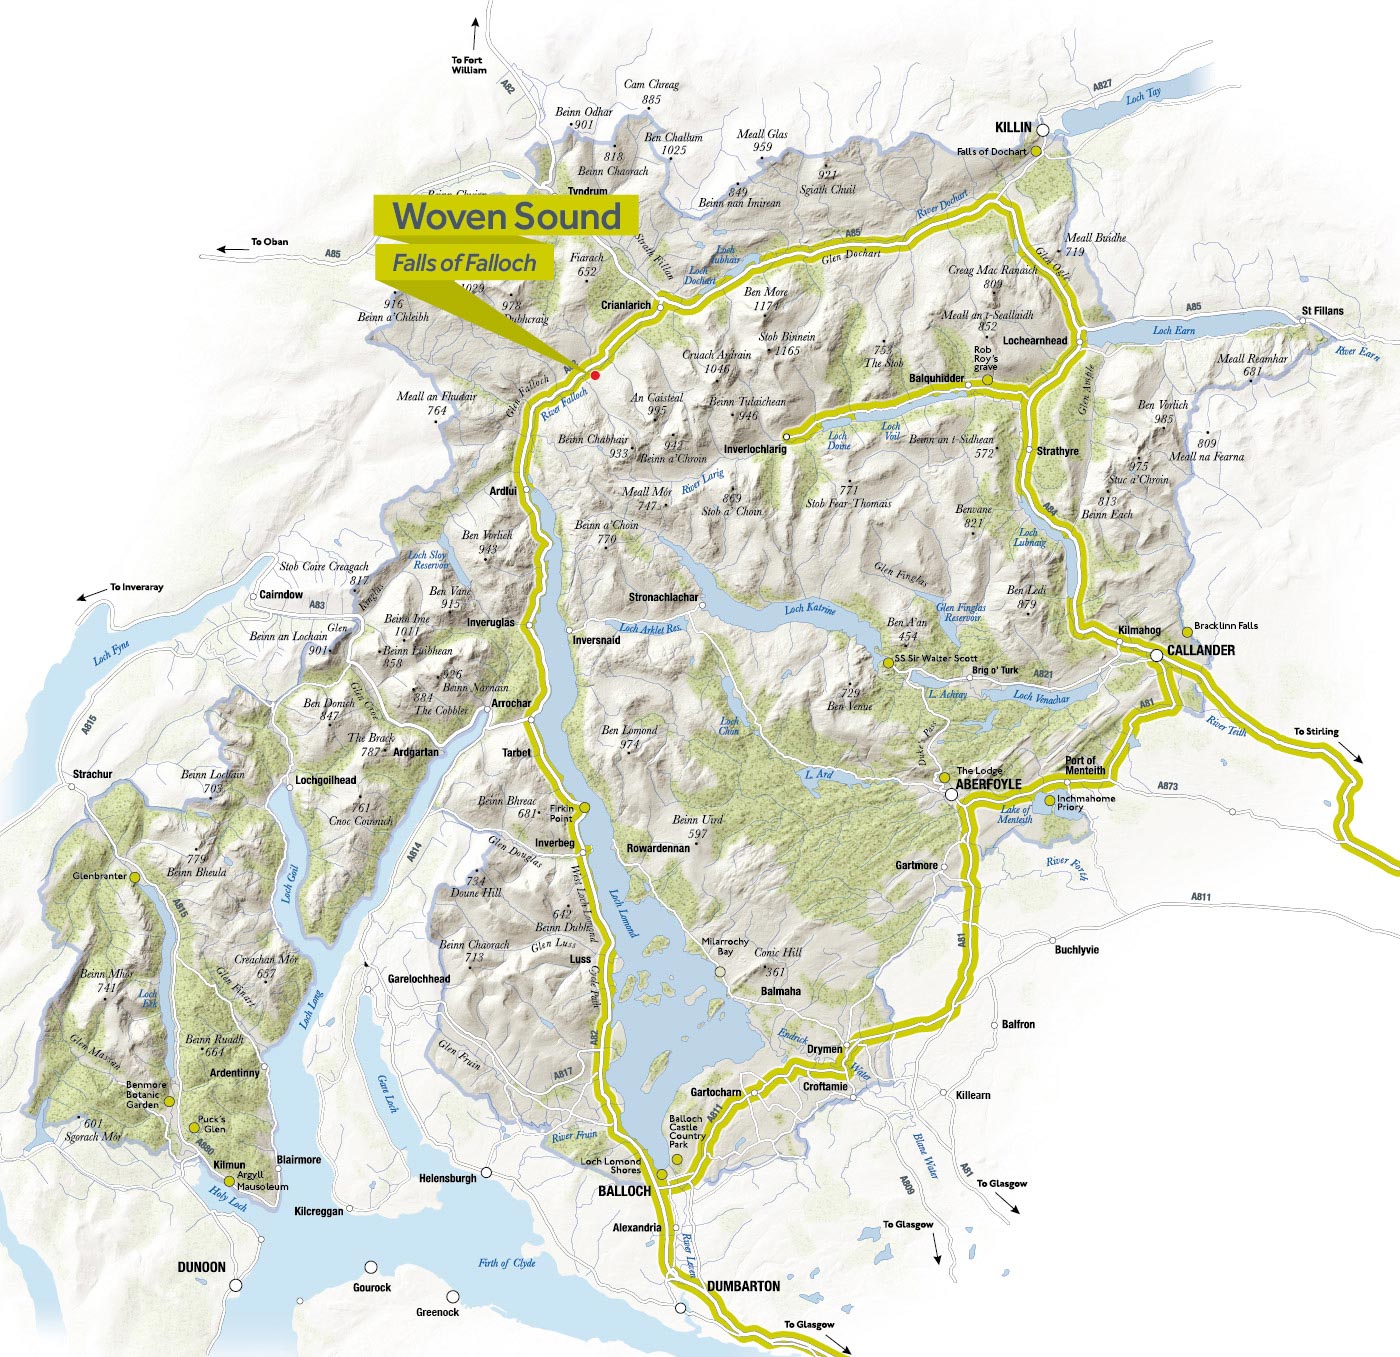 Click to view full size Woven Sound Scenic Route Map